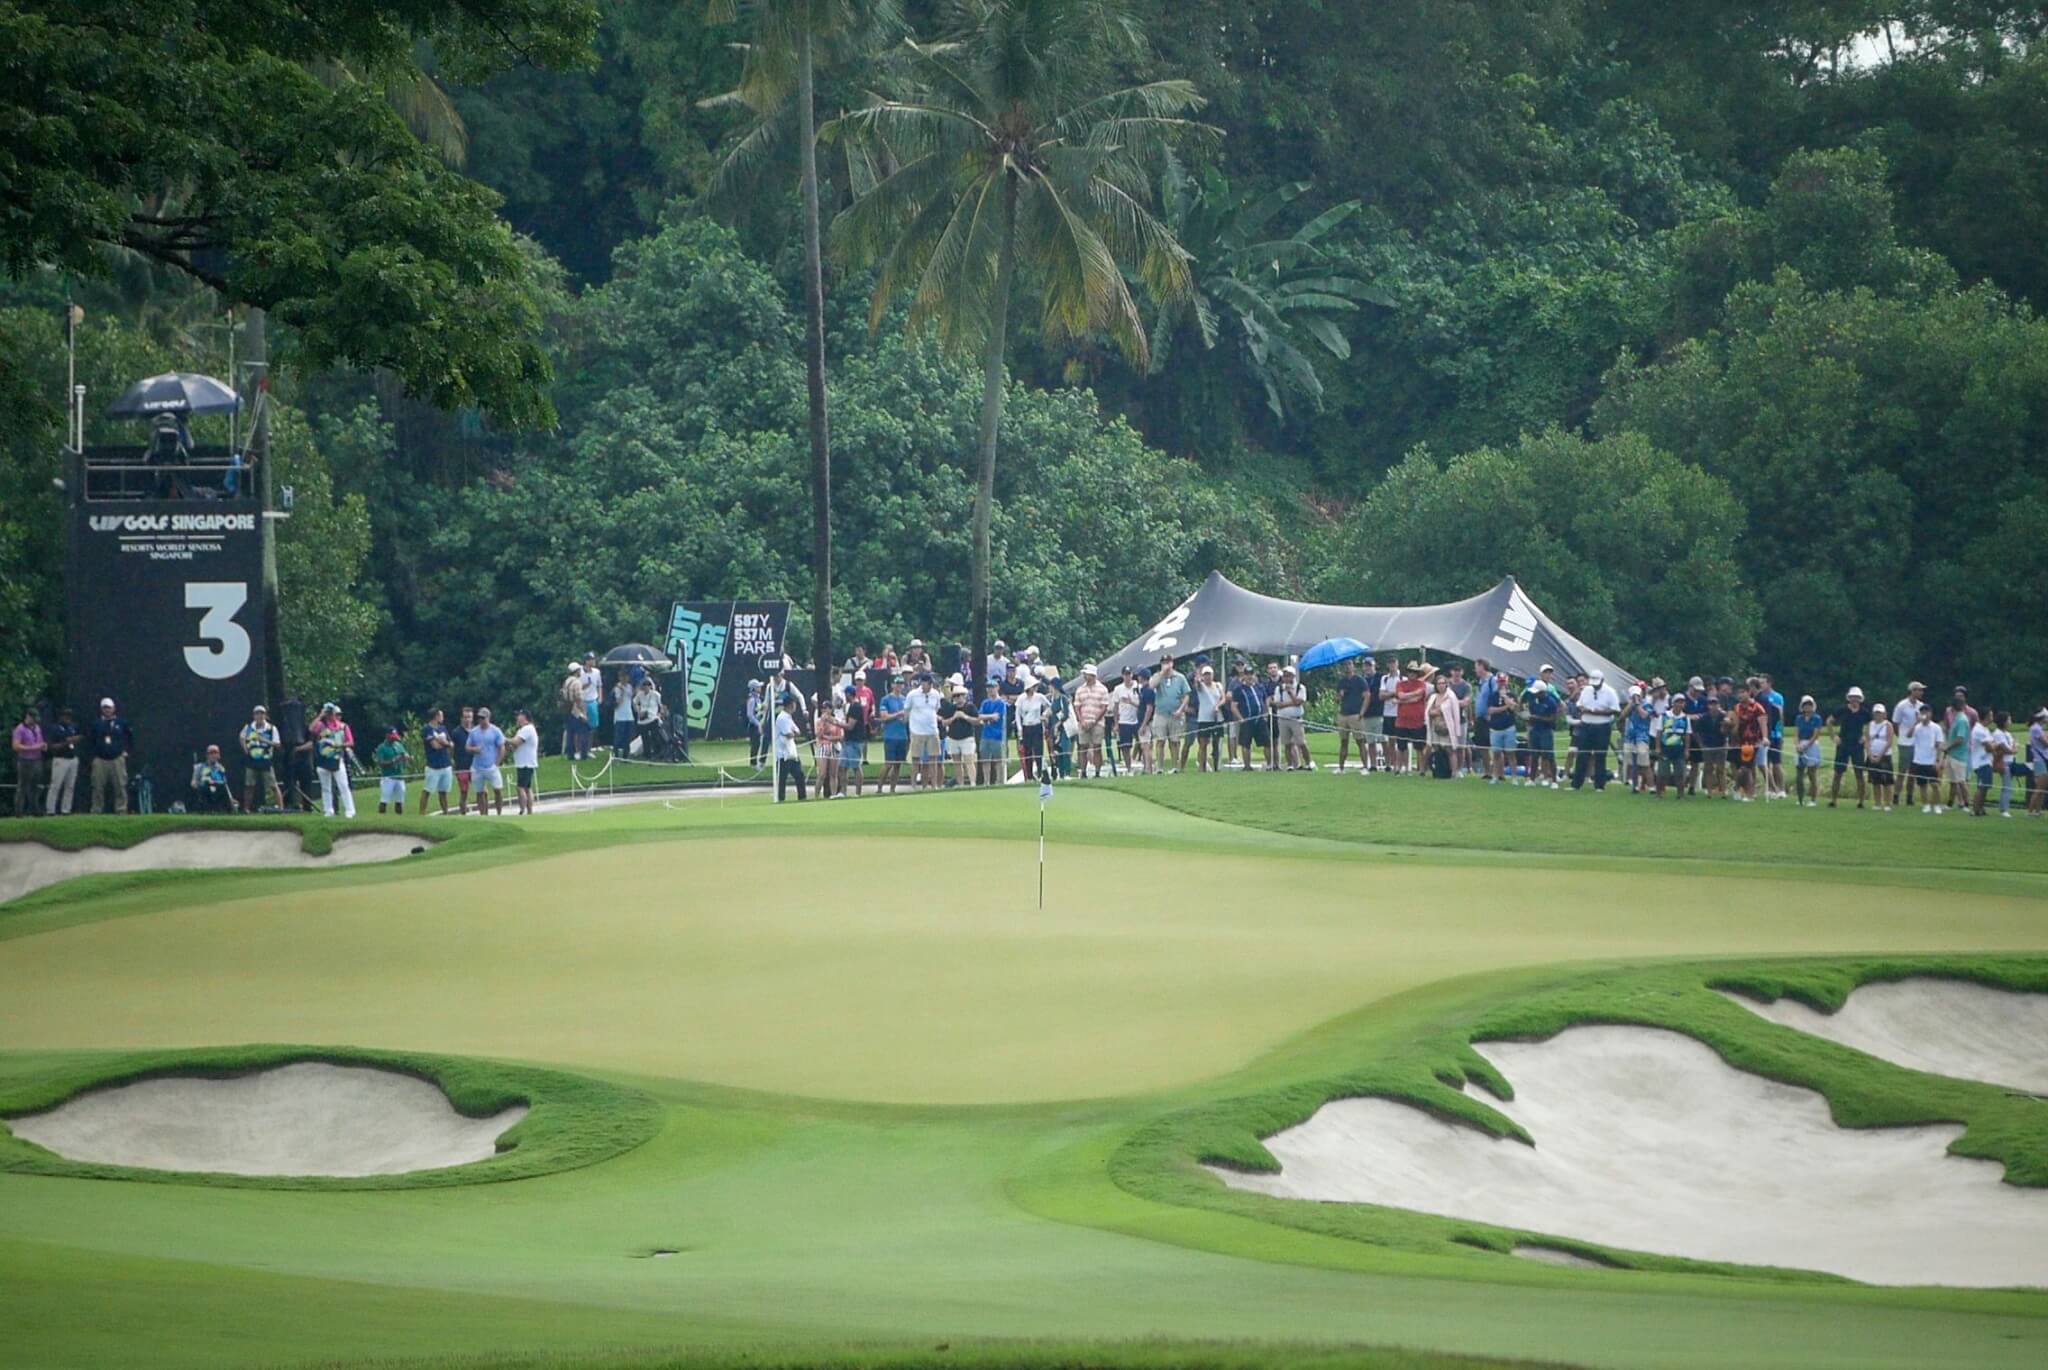 The course during LIV Golf Singapore at the Sentosa Golf Club in Singapore, 28 April 2023.